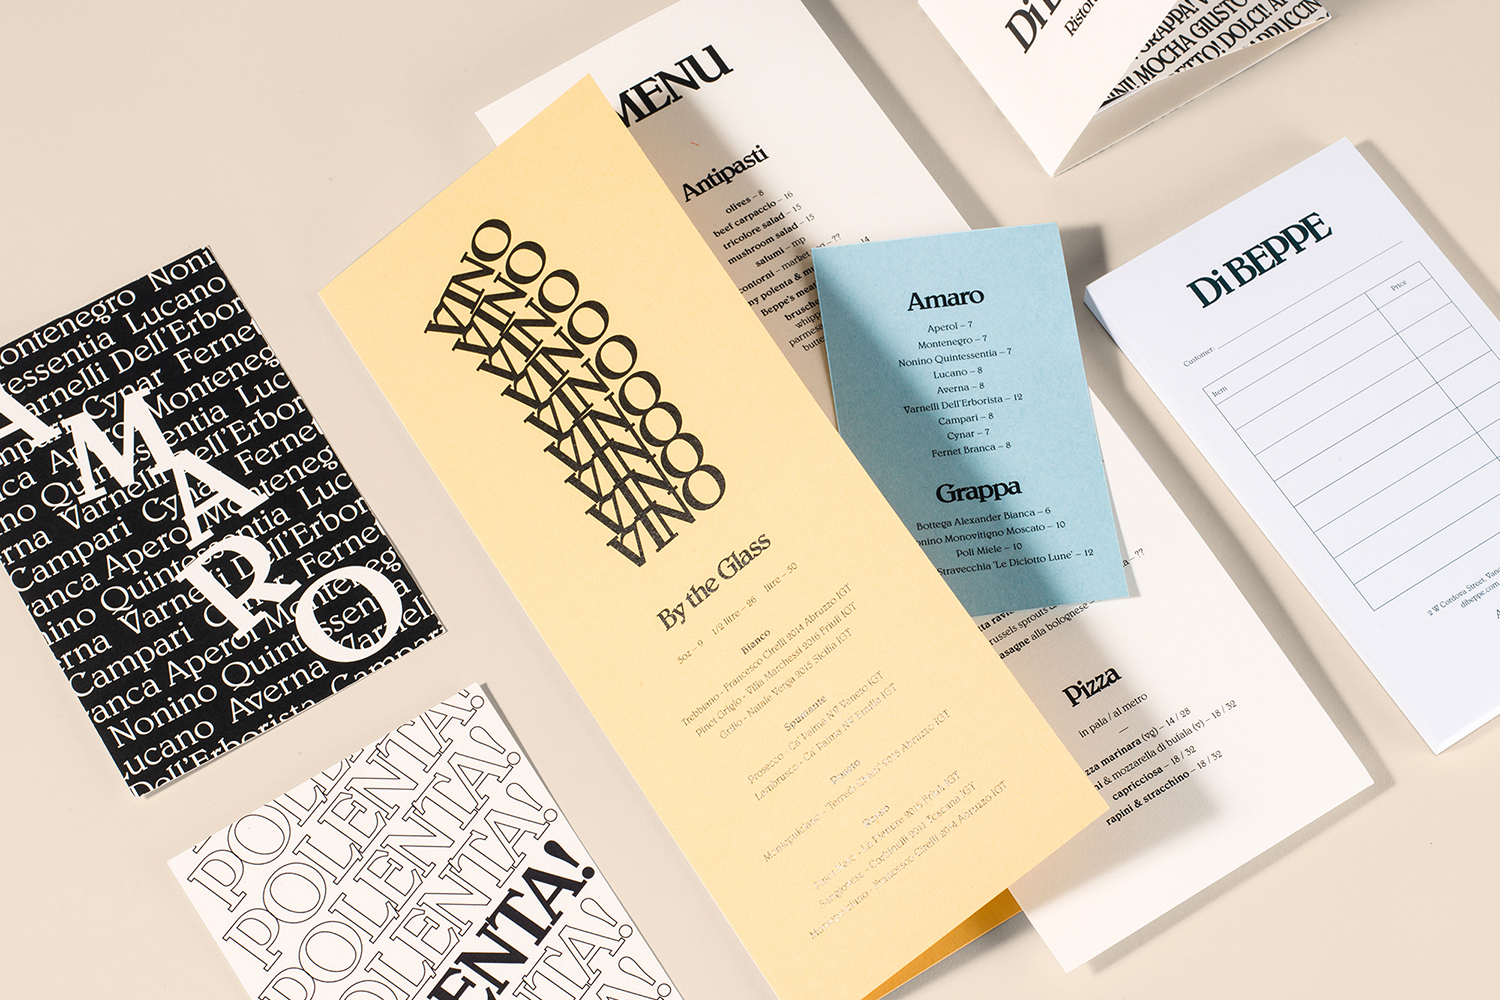 Logo and graphic identity for Italian cafe and restaurant Di Beppe by Glasfurd & Walker